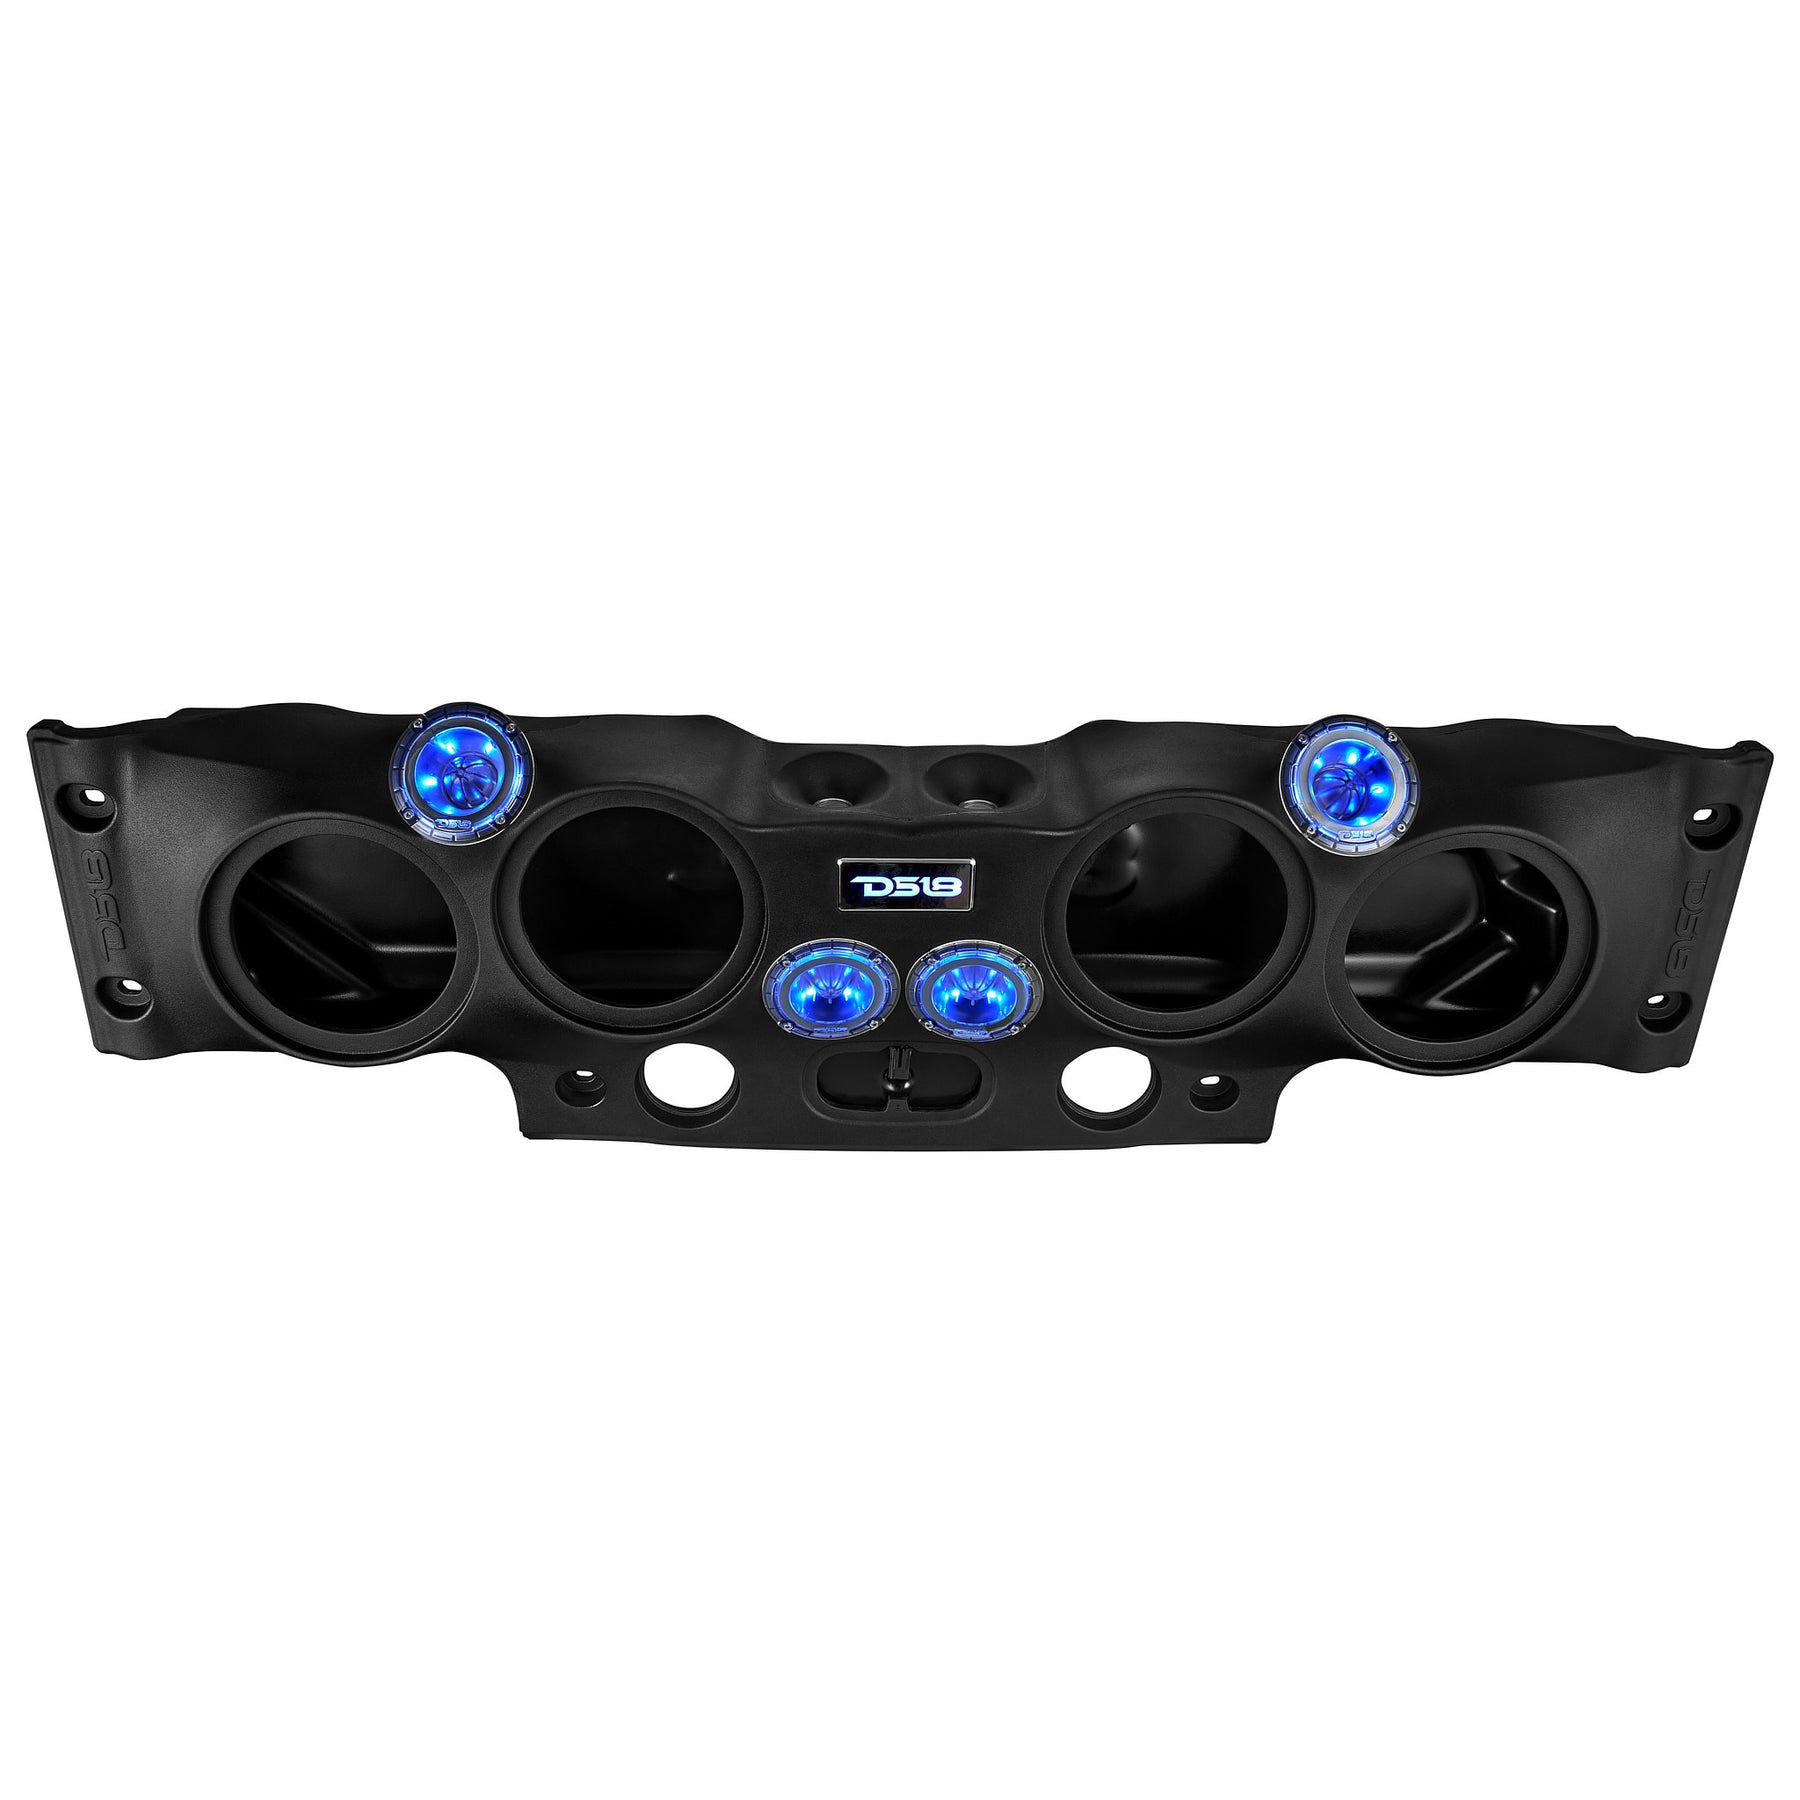 Jeep JK/JKU Overhead Sound Bar System Fits 4 X 8" Speakers (Not included) 4 X Tweeters PRO-TW4L and 2 X Drivers PRO-DRNSC1.5 and Harness Included- Black